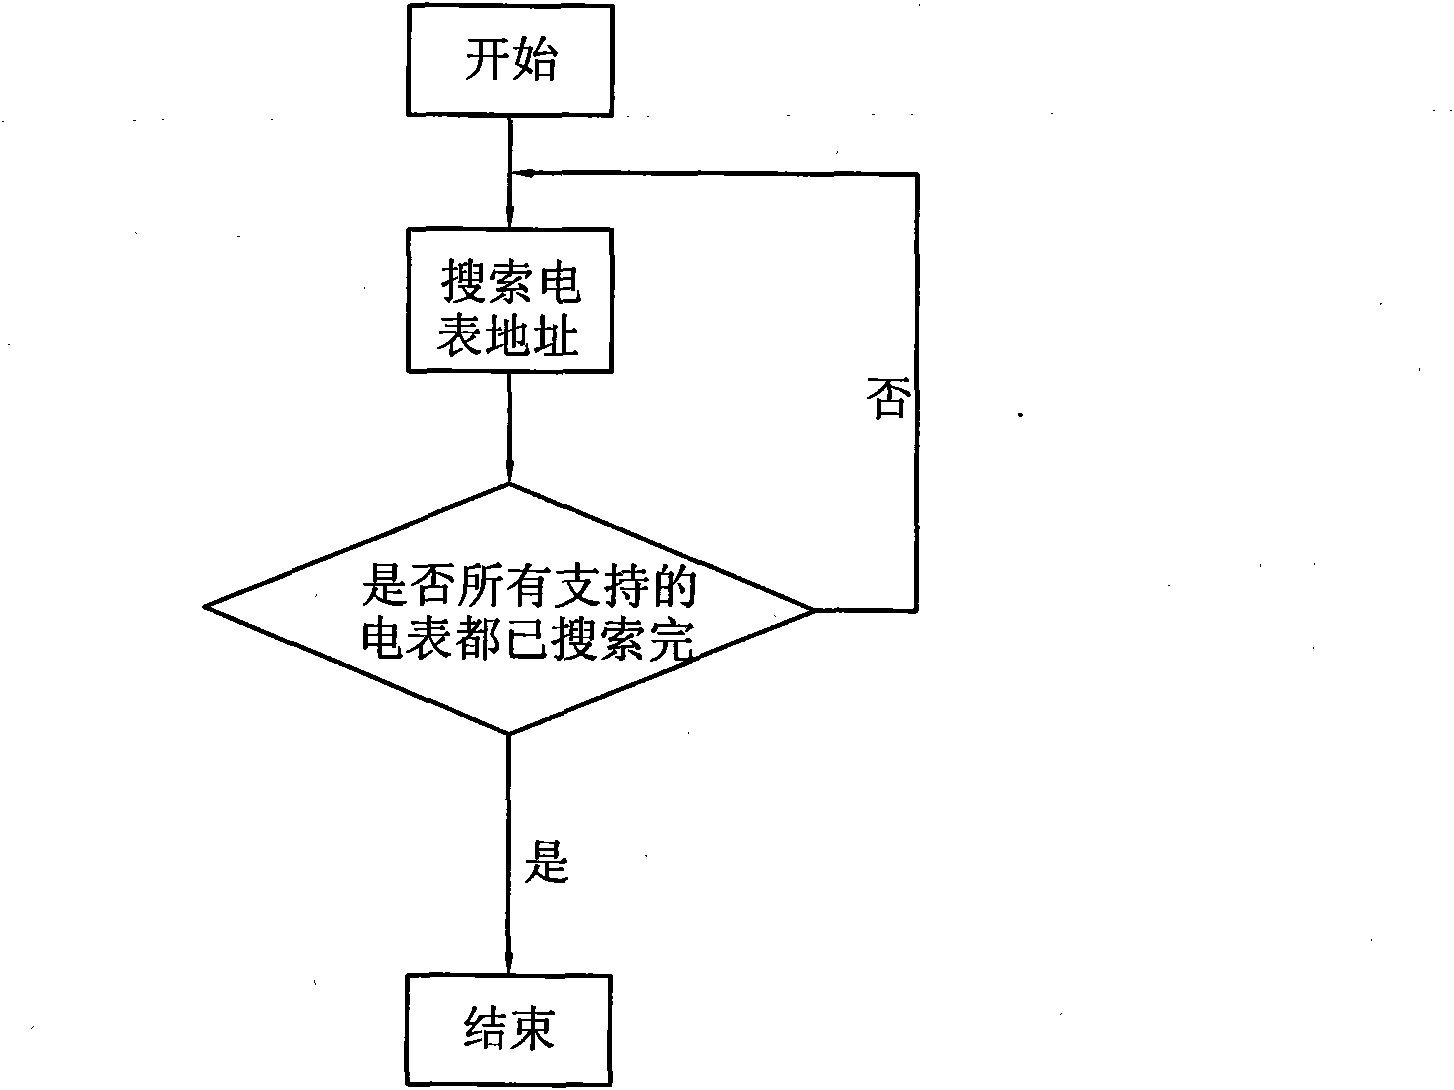 Method for automatically searching electric meter address below collector